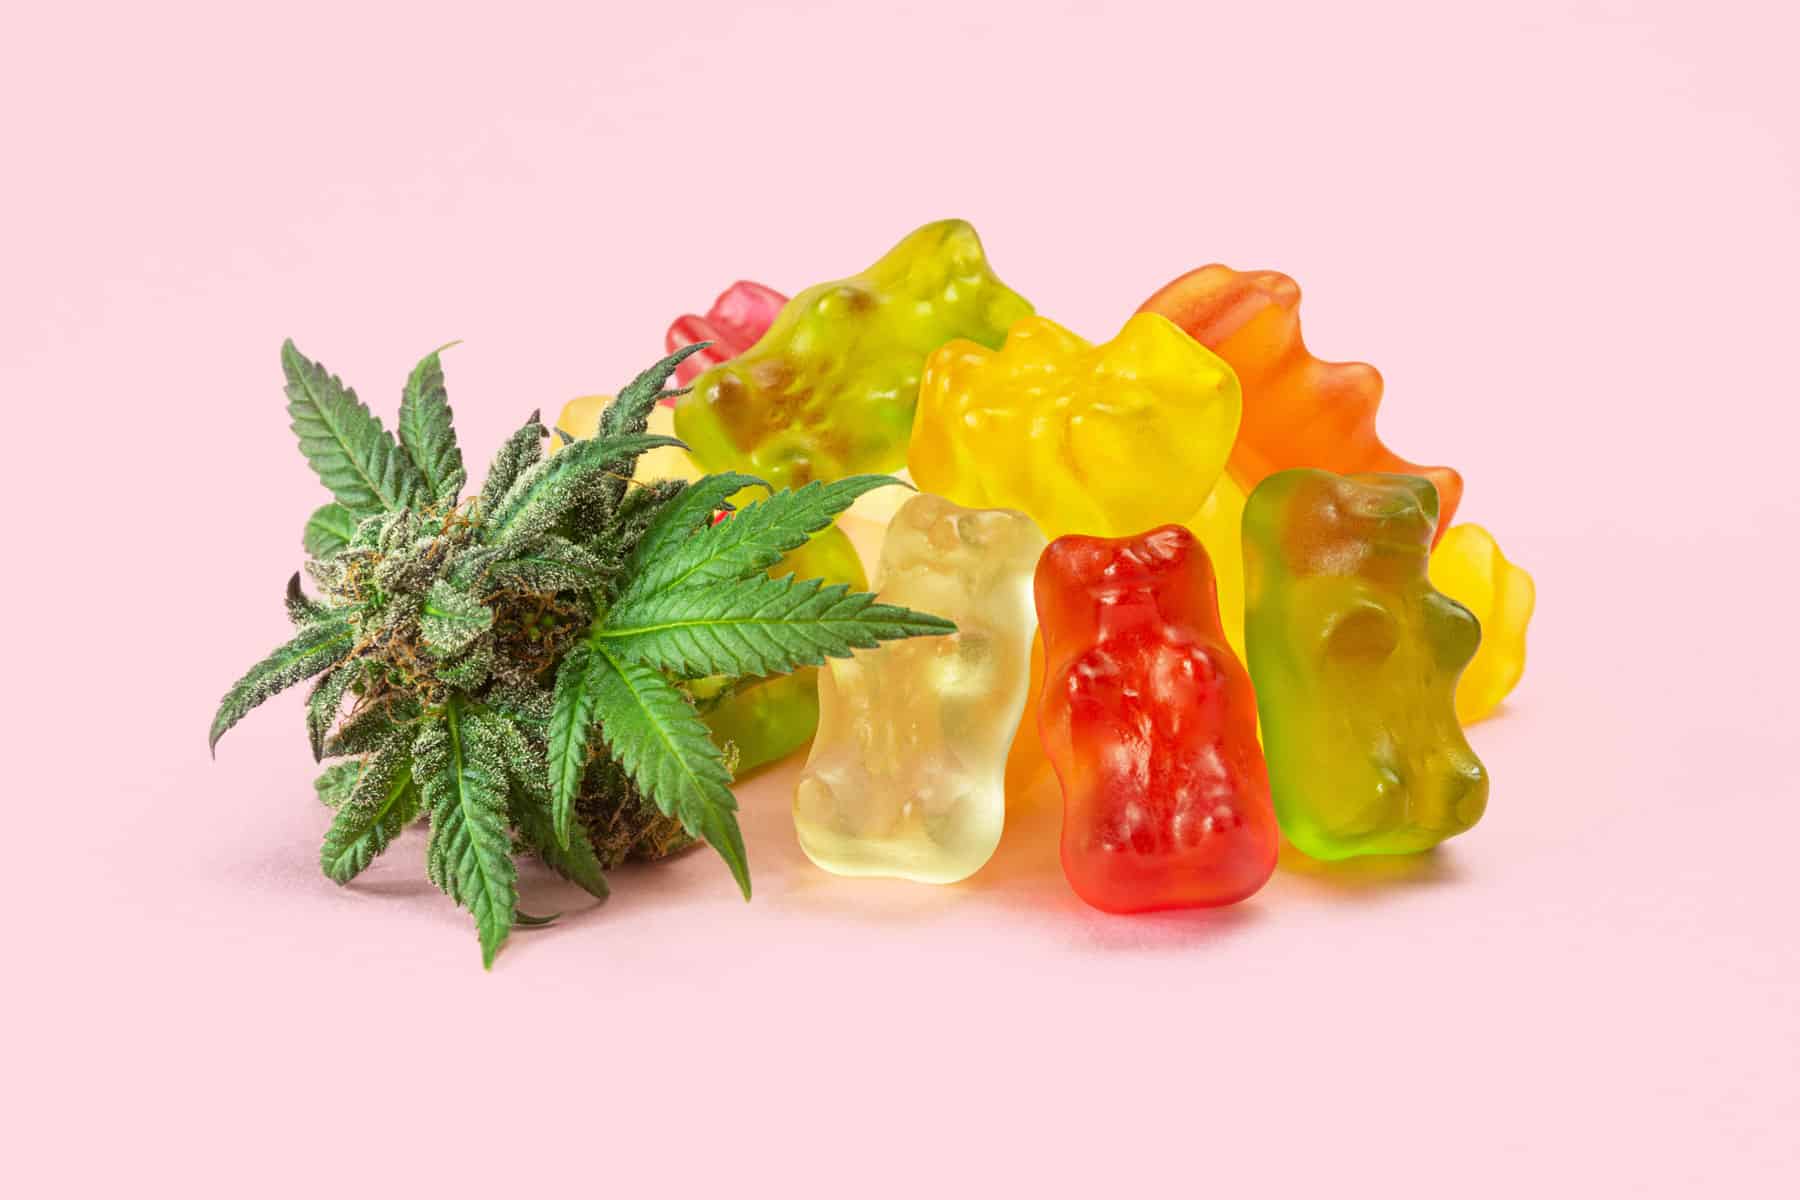 Delta-8 Gummies Flavors: An Overview of Sweet, Sour, and Fruity Options